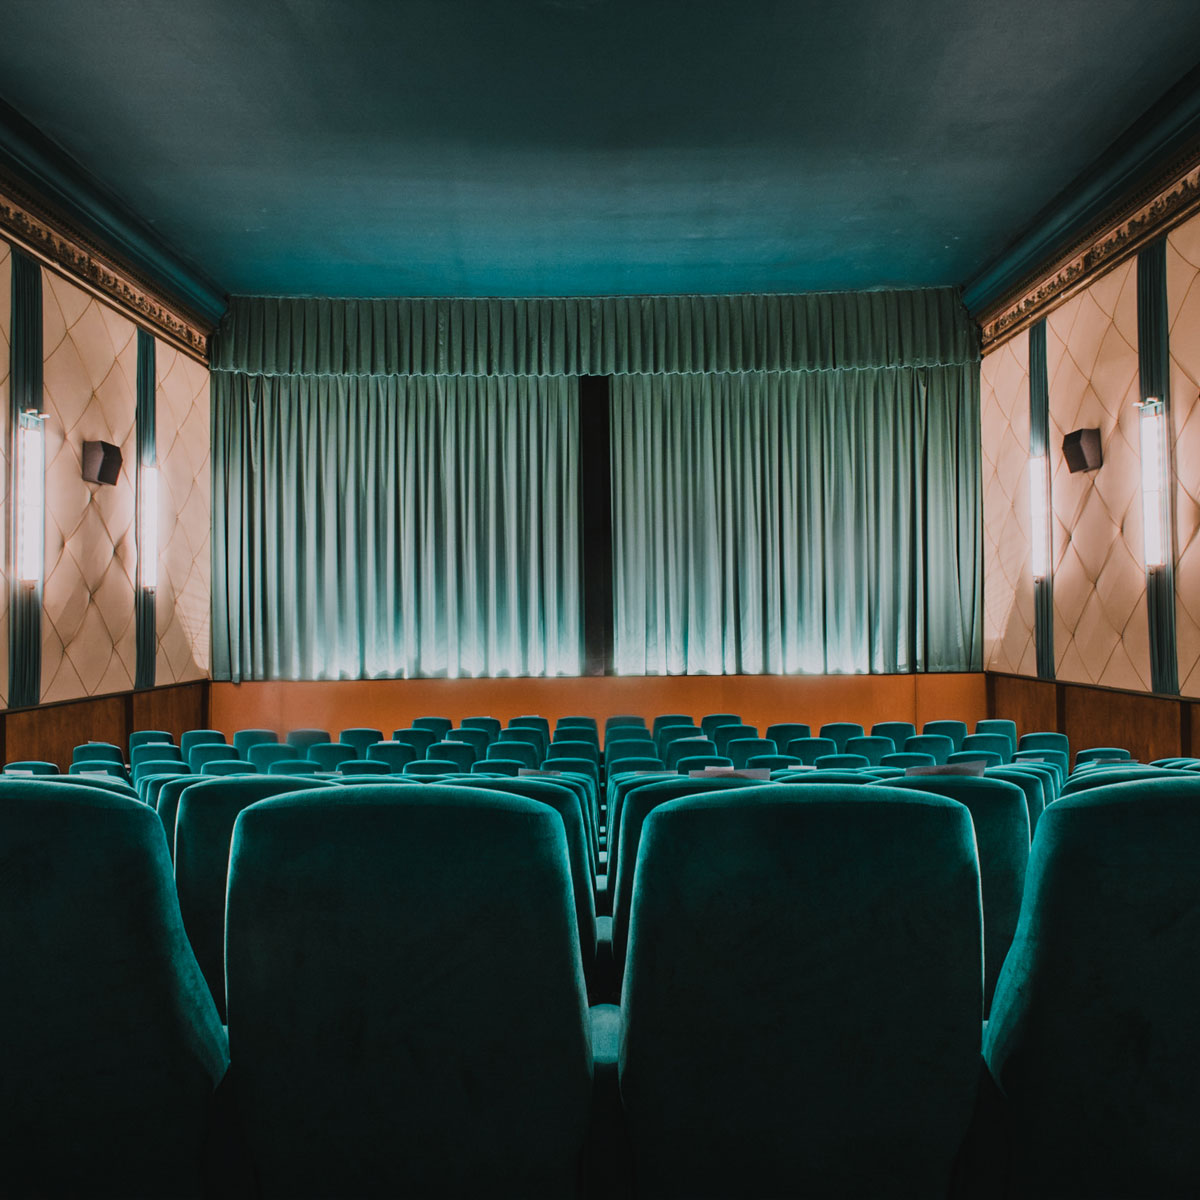 NEUES OFF KINO interior photo facing the theatre screen covered with teal velvet curtains.